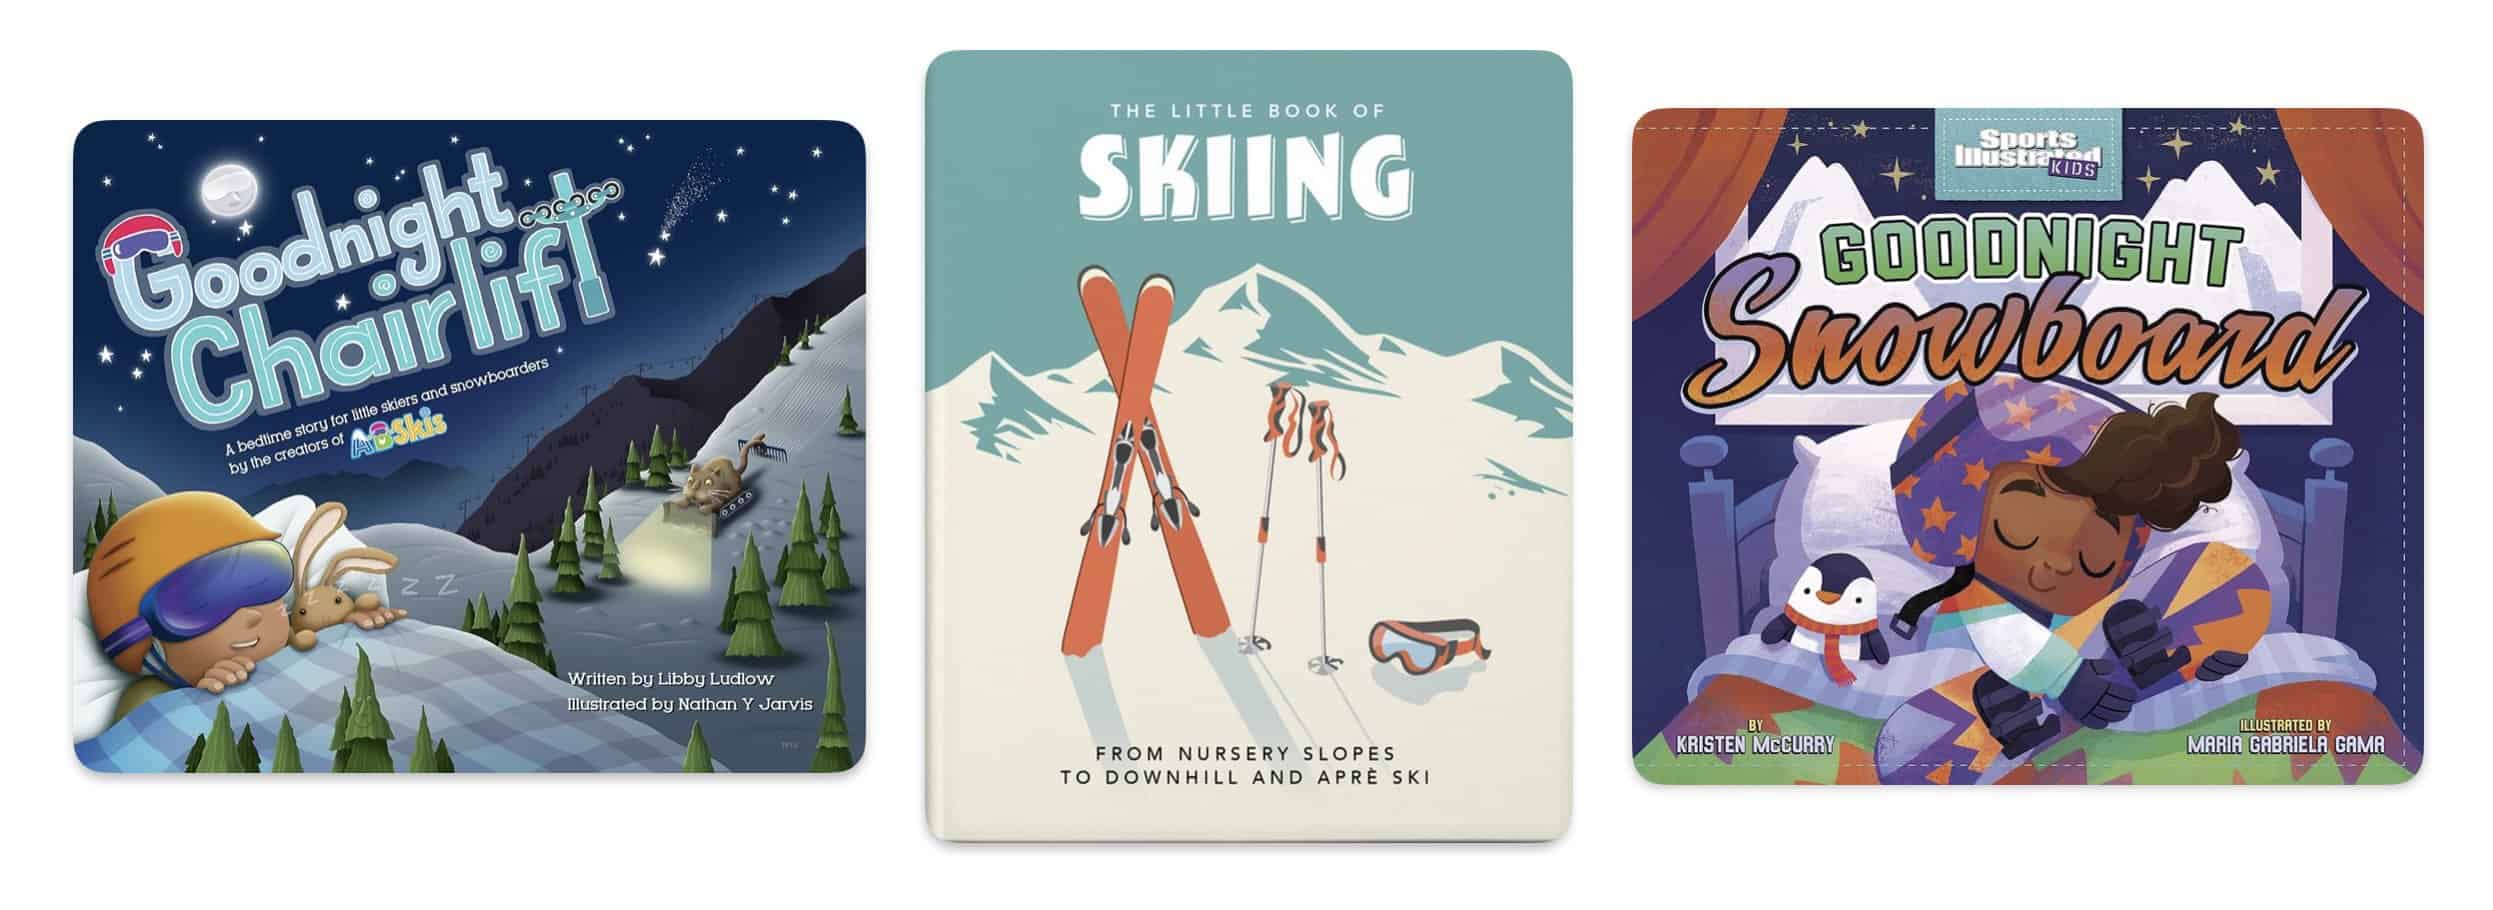 3 books about winter sports